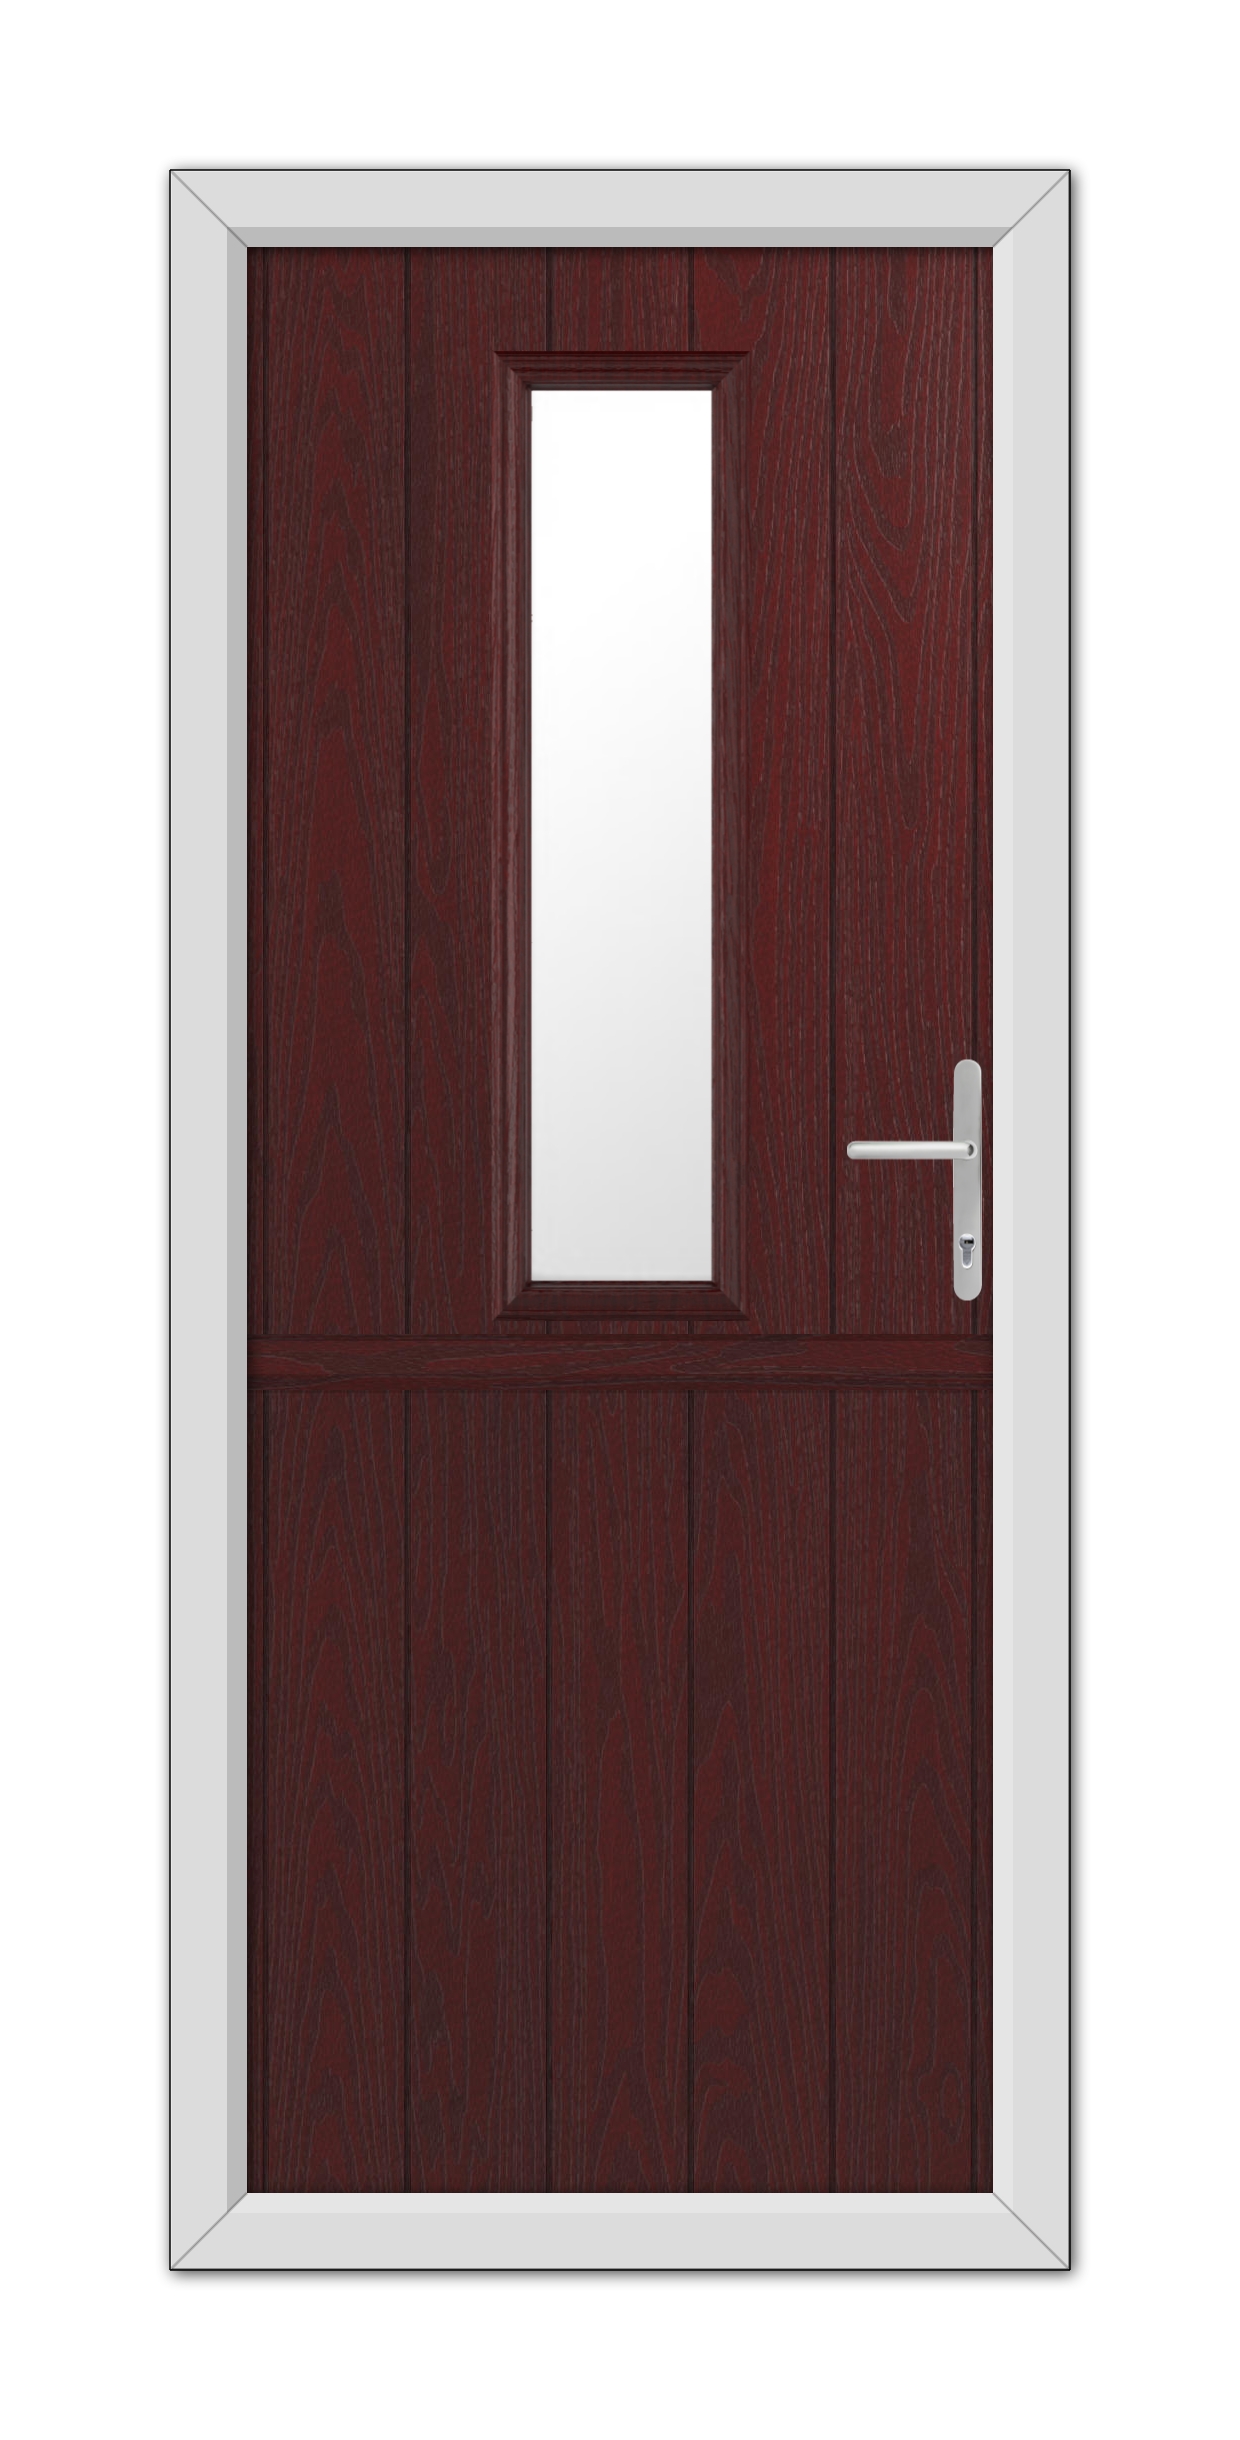 A Rosewood Mowbray Stable Composite Door 48mm Timber Core with a small rectangular window at the top and a white handle on the right side, set within a white frame.